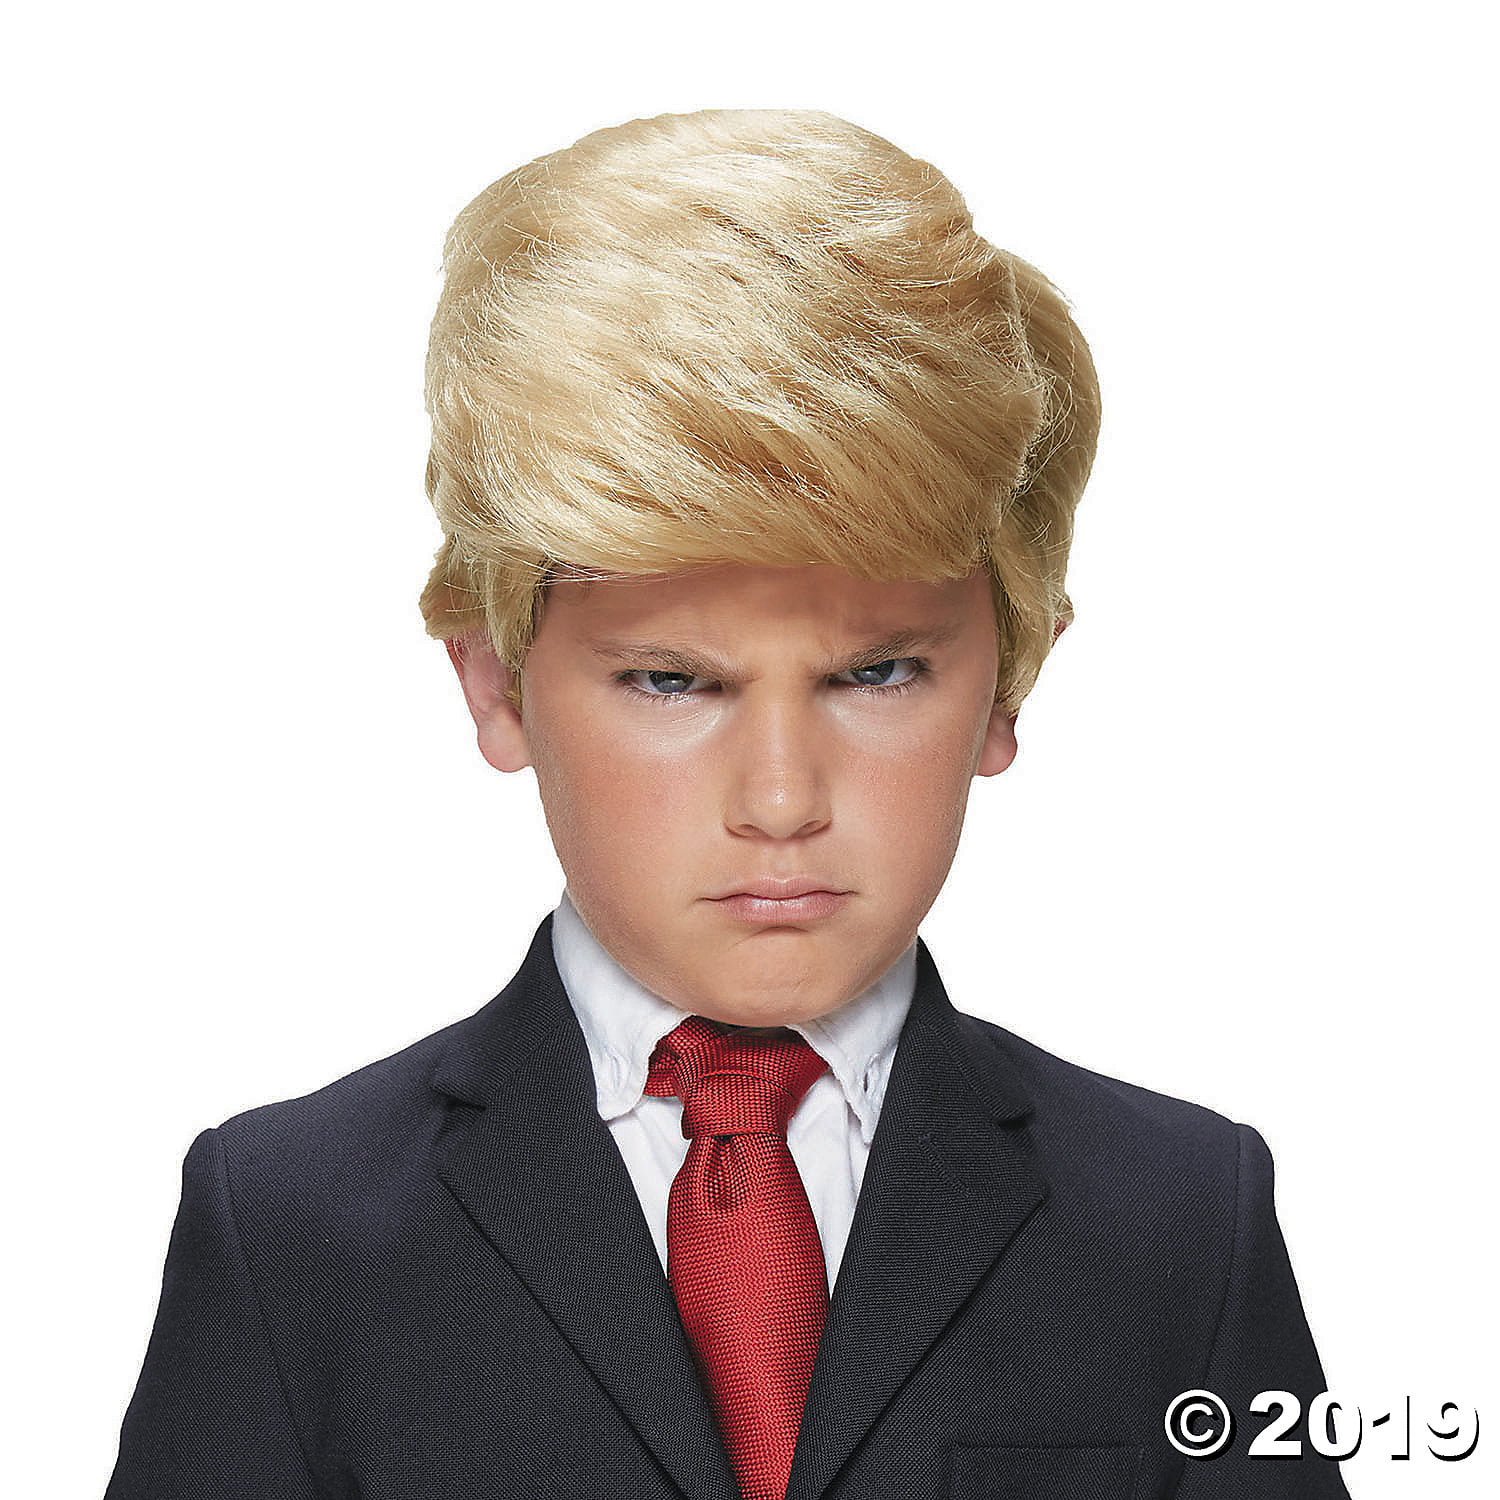 Donald Trump Deluxe Wig Adult Costume Accessory President Halloween Hair Piece 